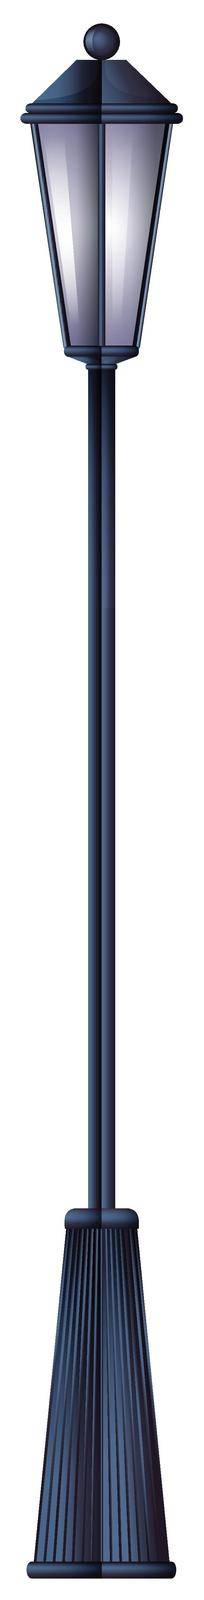 A tall lamp on a white background